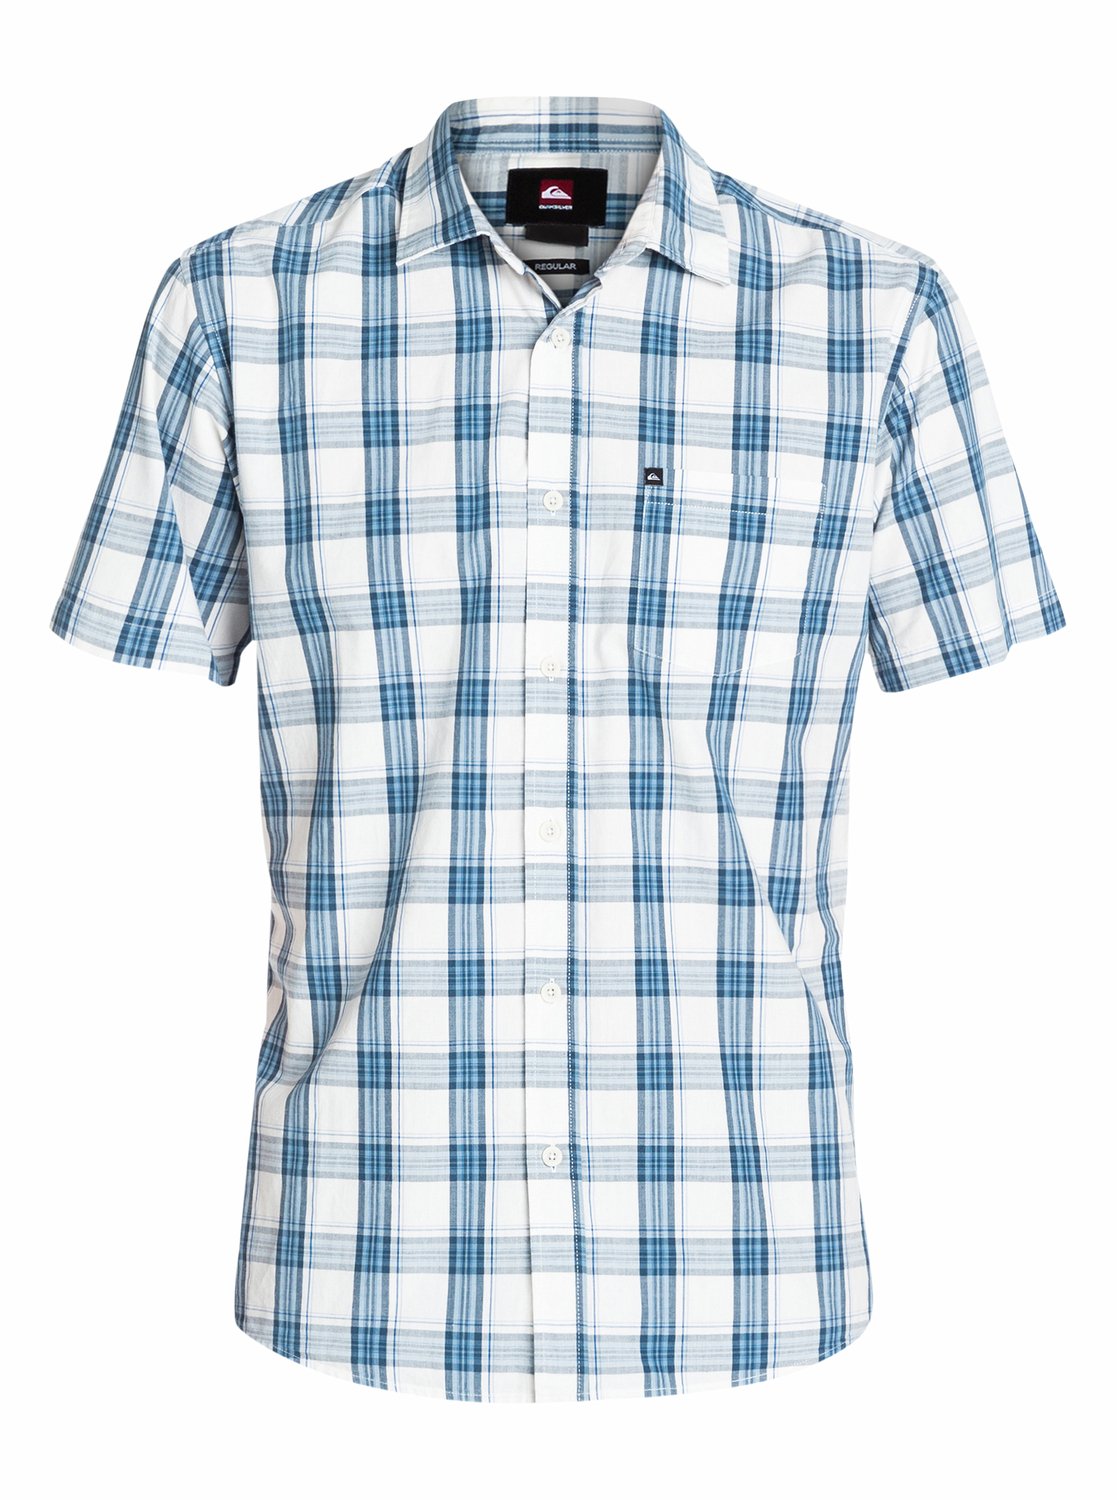 Quiksilver Mens Everyday Check Short Sleeve